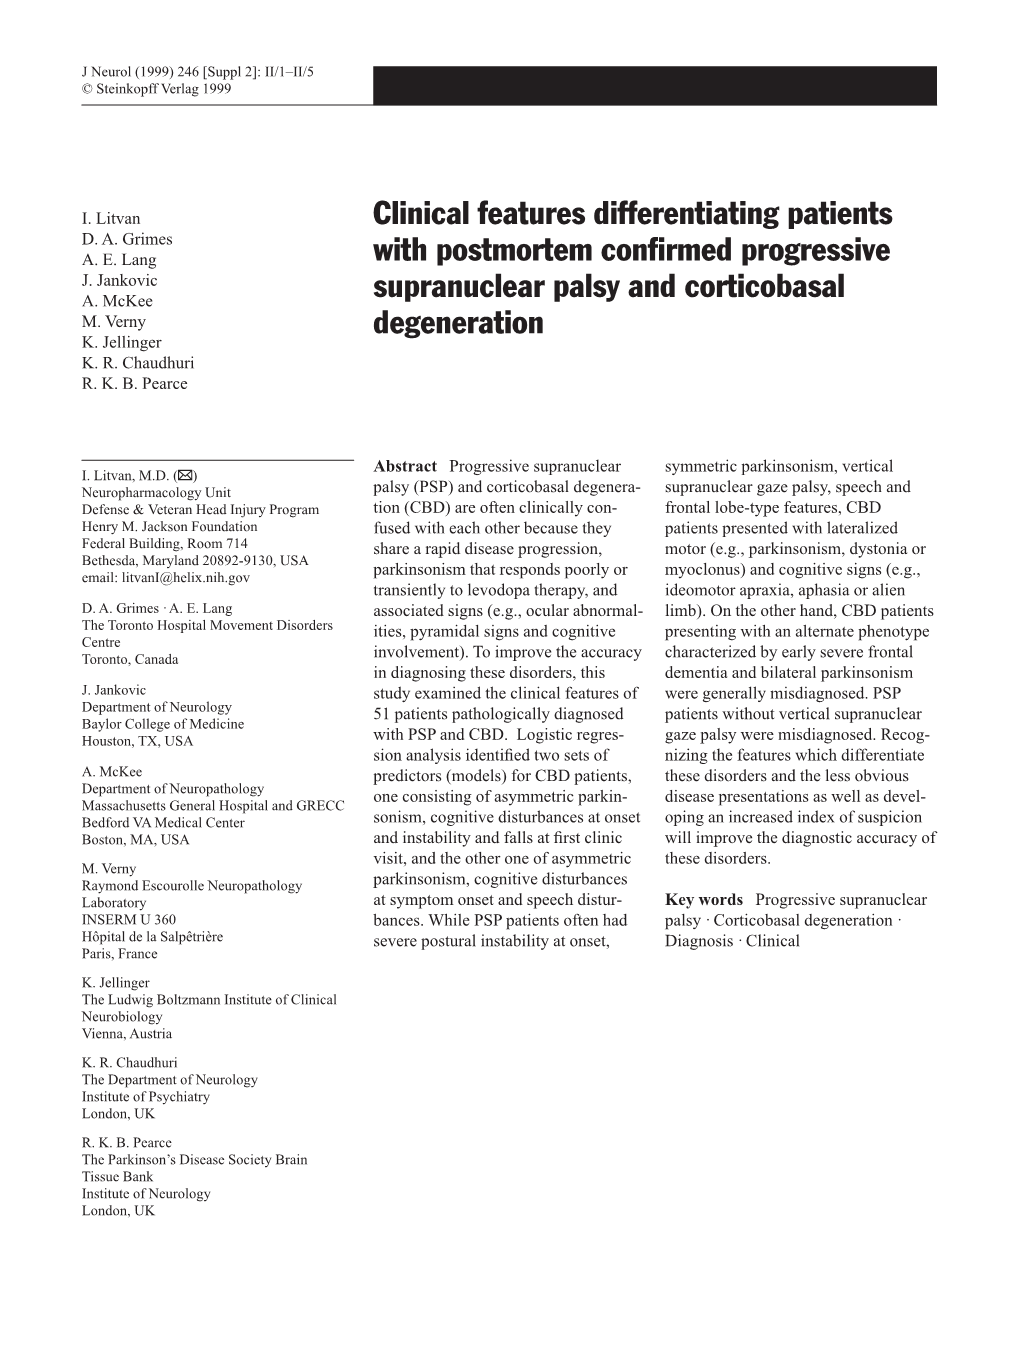 Clinical Features Differentiating Patients with Postmortem Confirmed